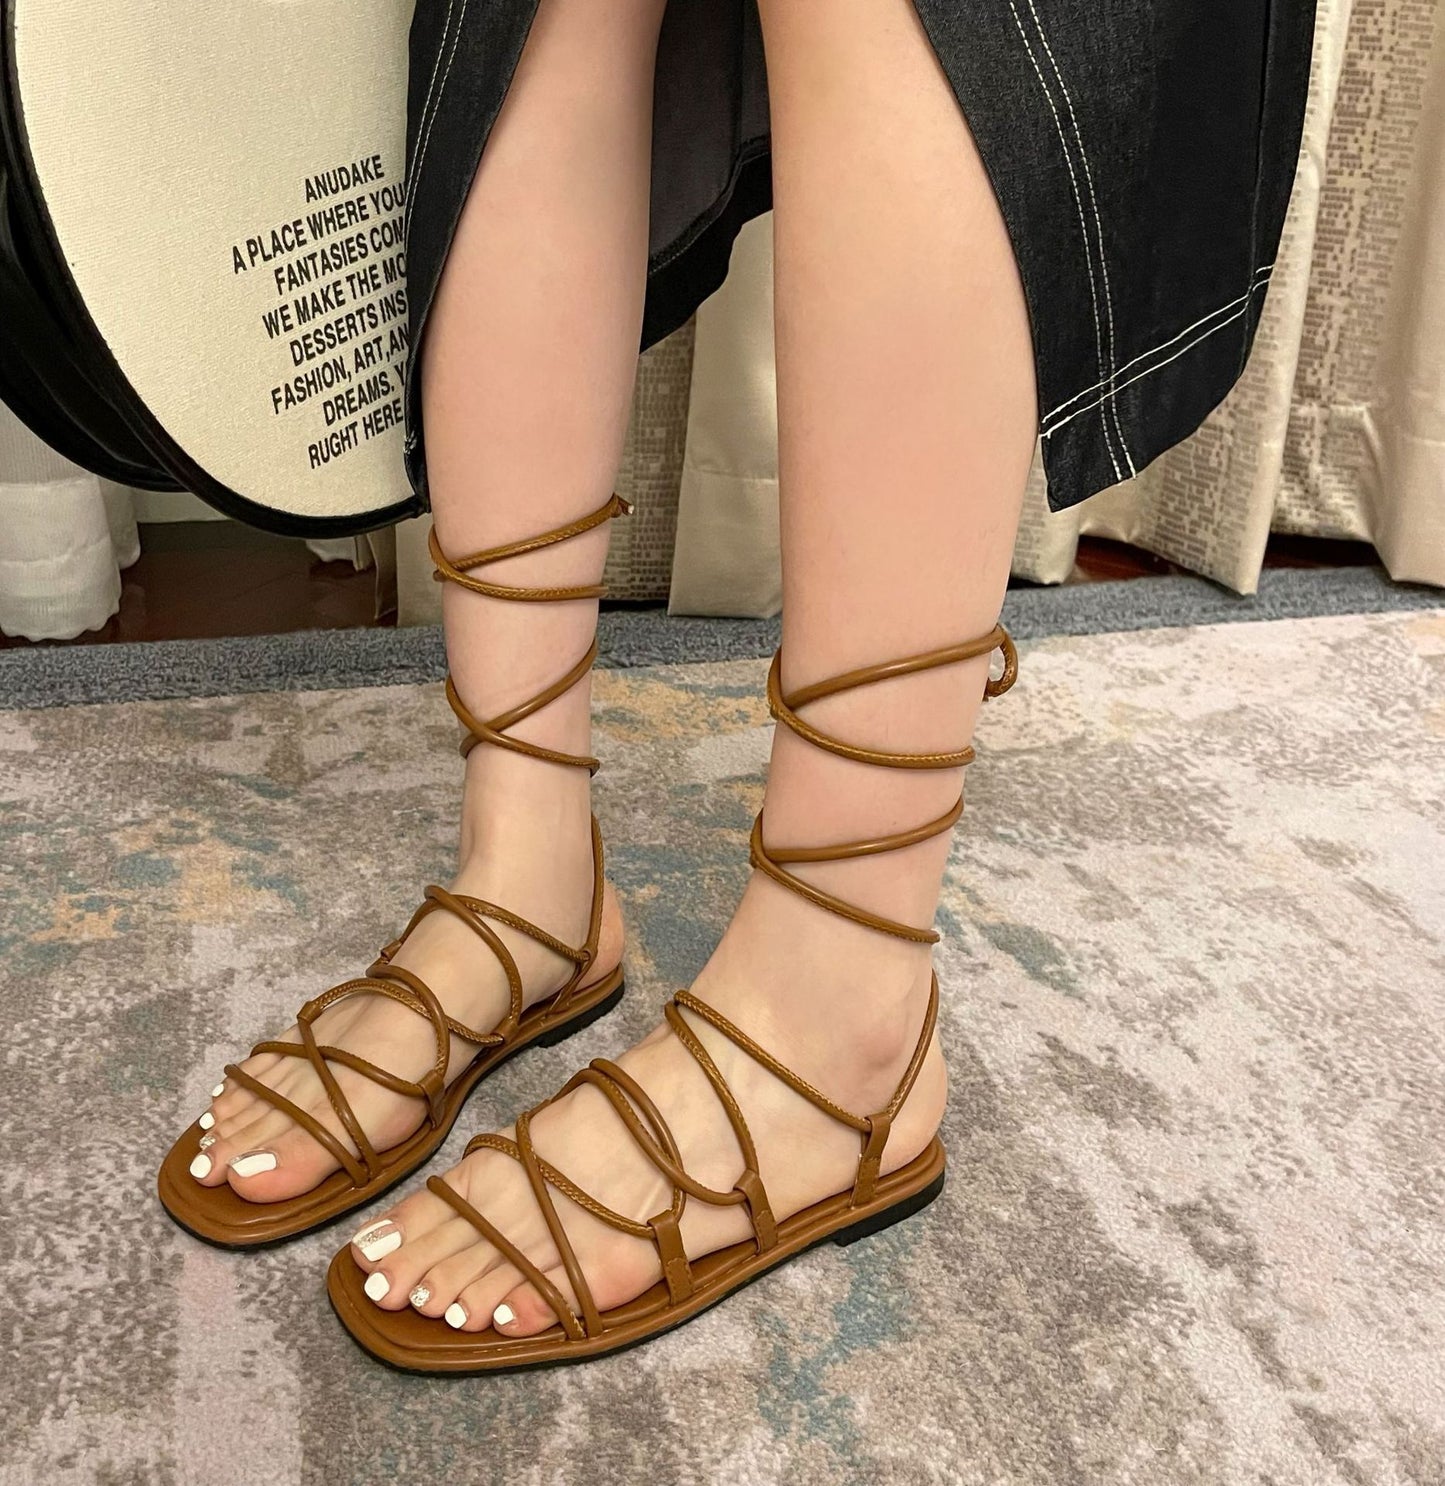 Long Tube Cool Boots Women's Strappy New Korean Version Sexy Fashion High Tube Low Heel Flat Brown Travel